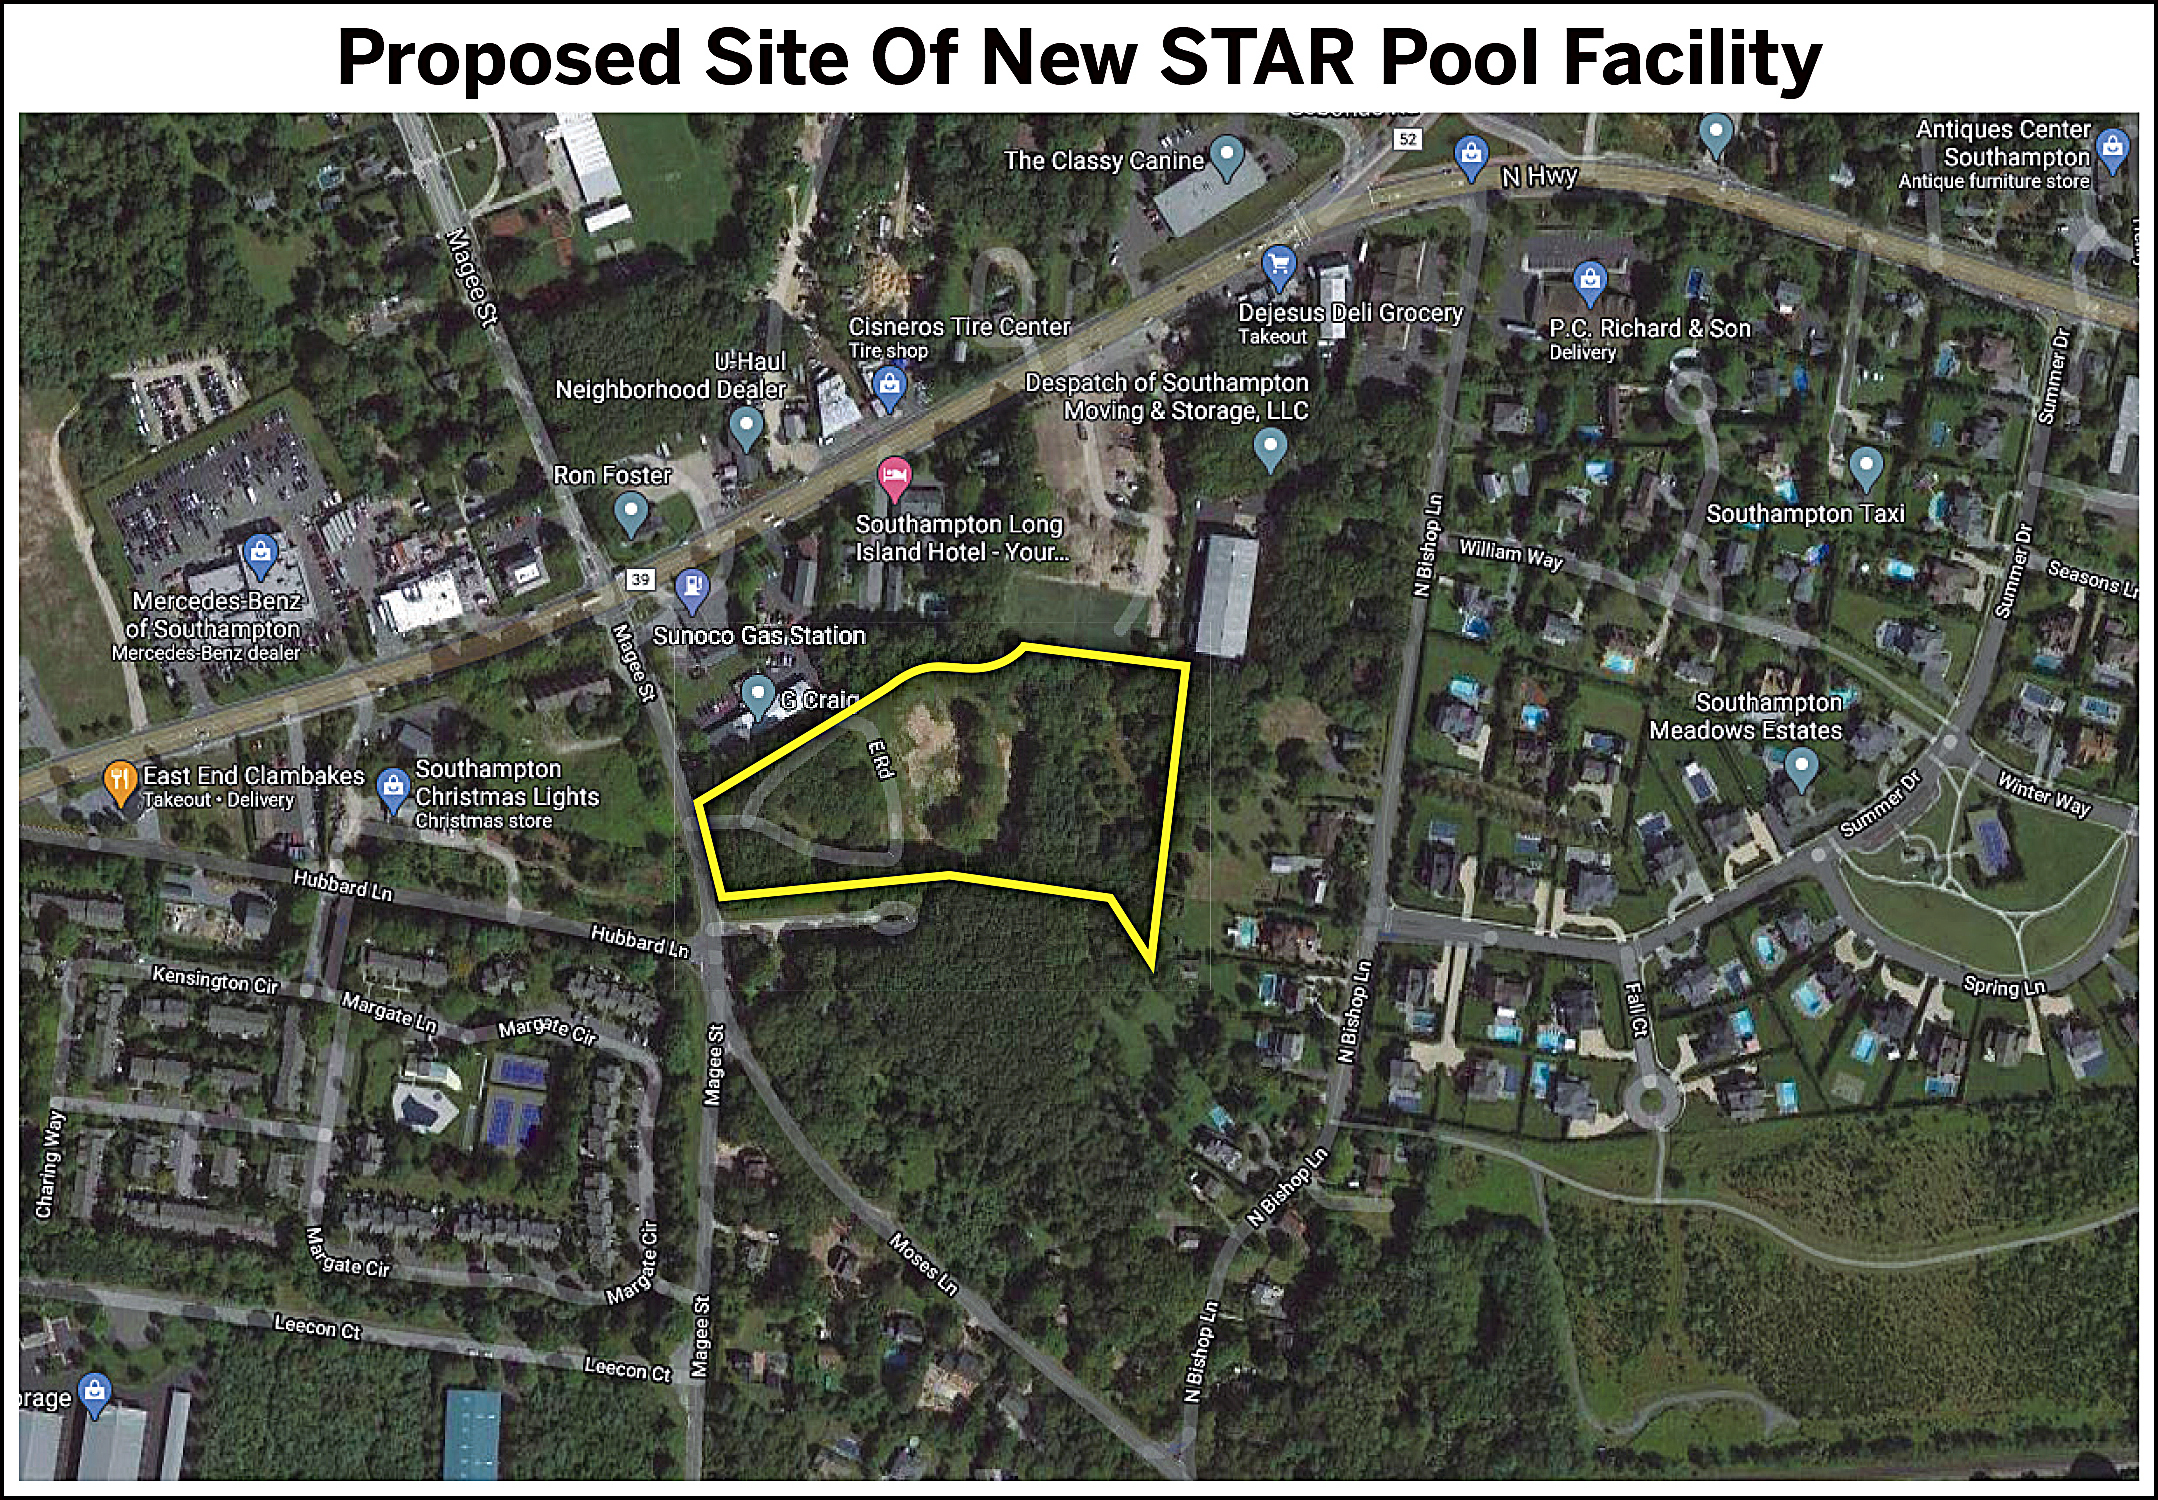 The proposed site for the new STAR pool facility.